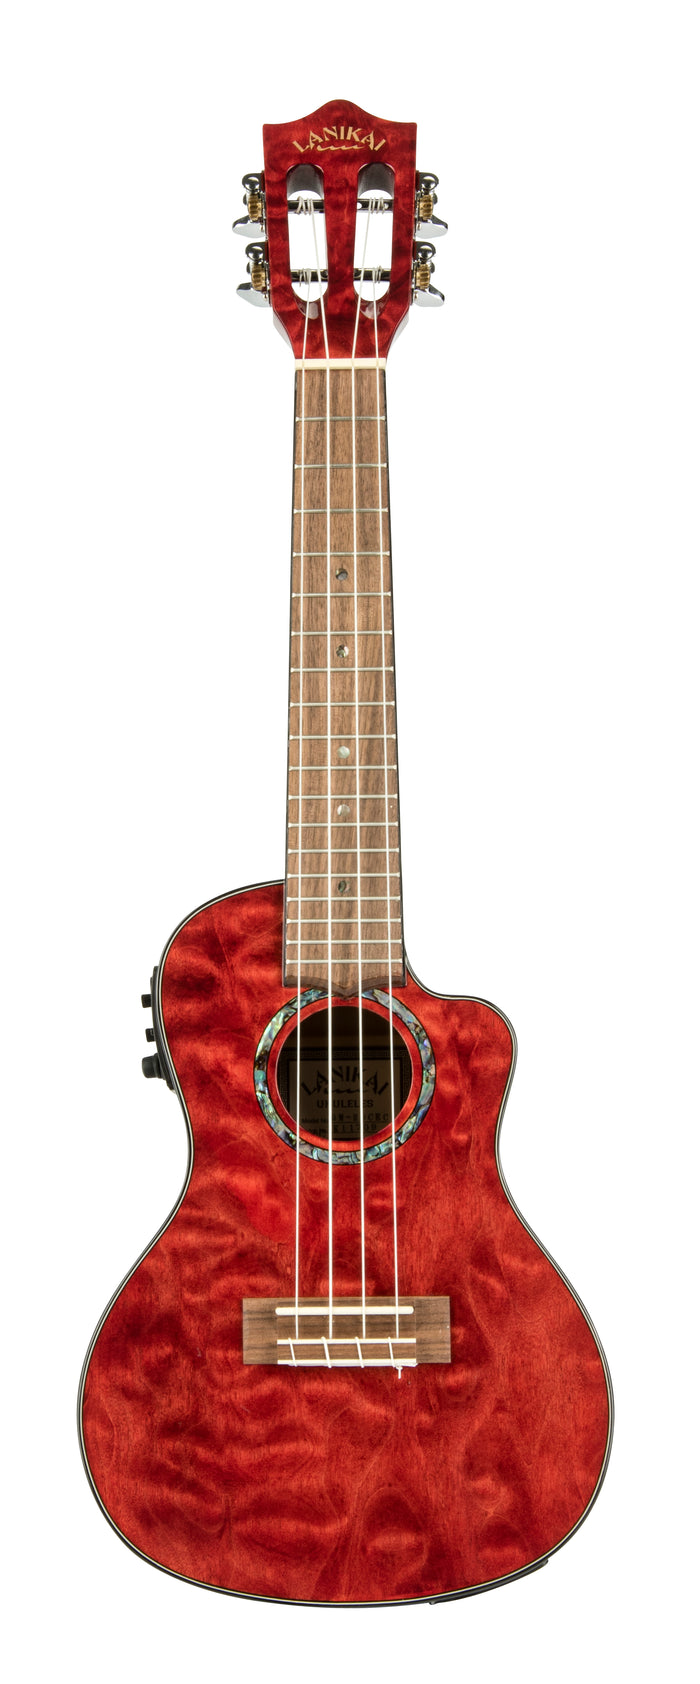 Lanikai Quilted Maple Red Stain Concert Cutaway with Fishman Kula Preamp with tuner A/E Ukulele